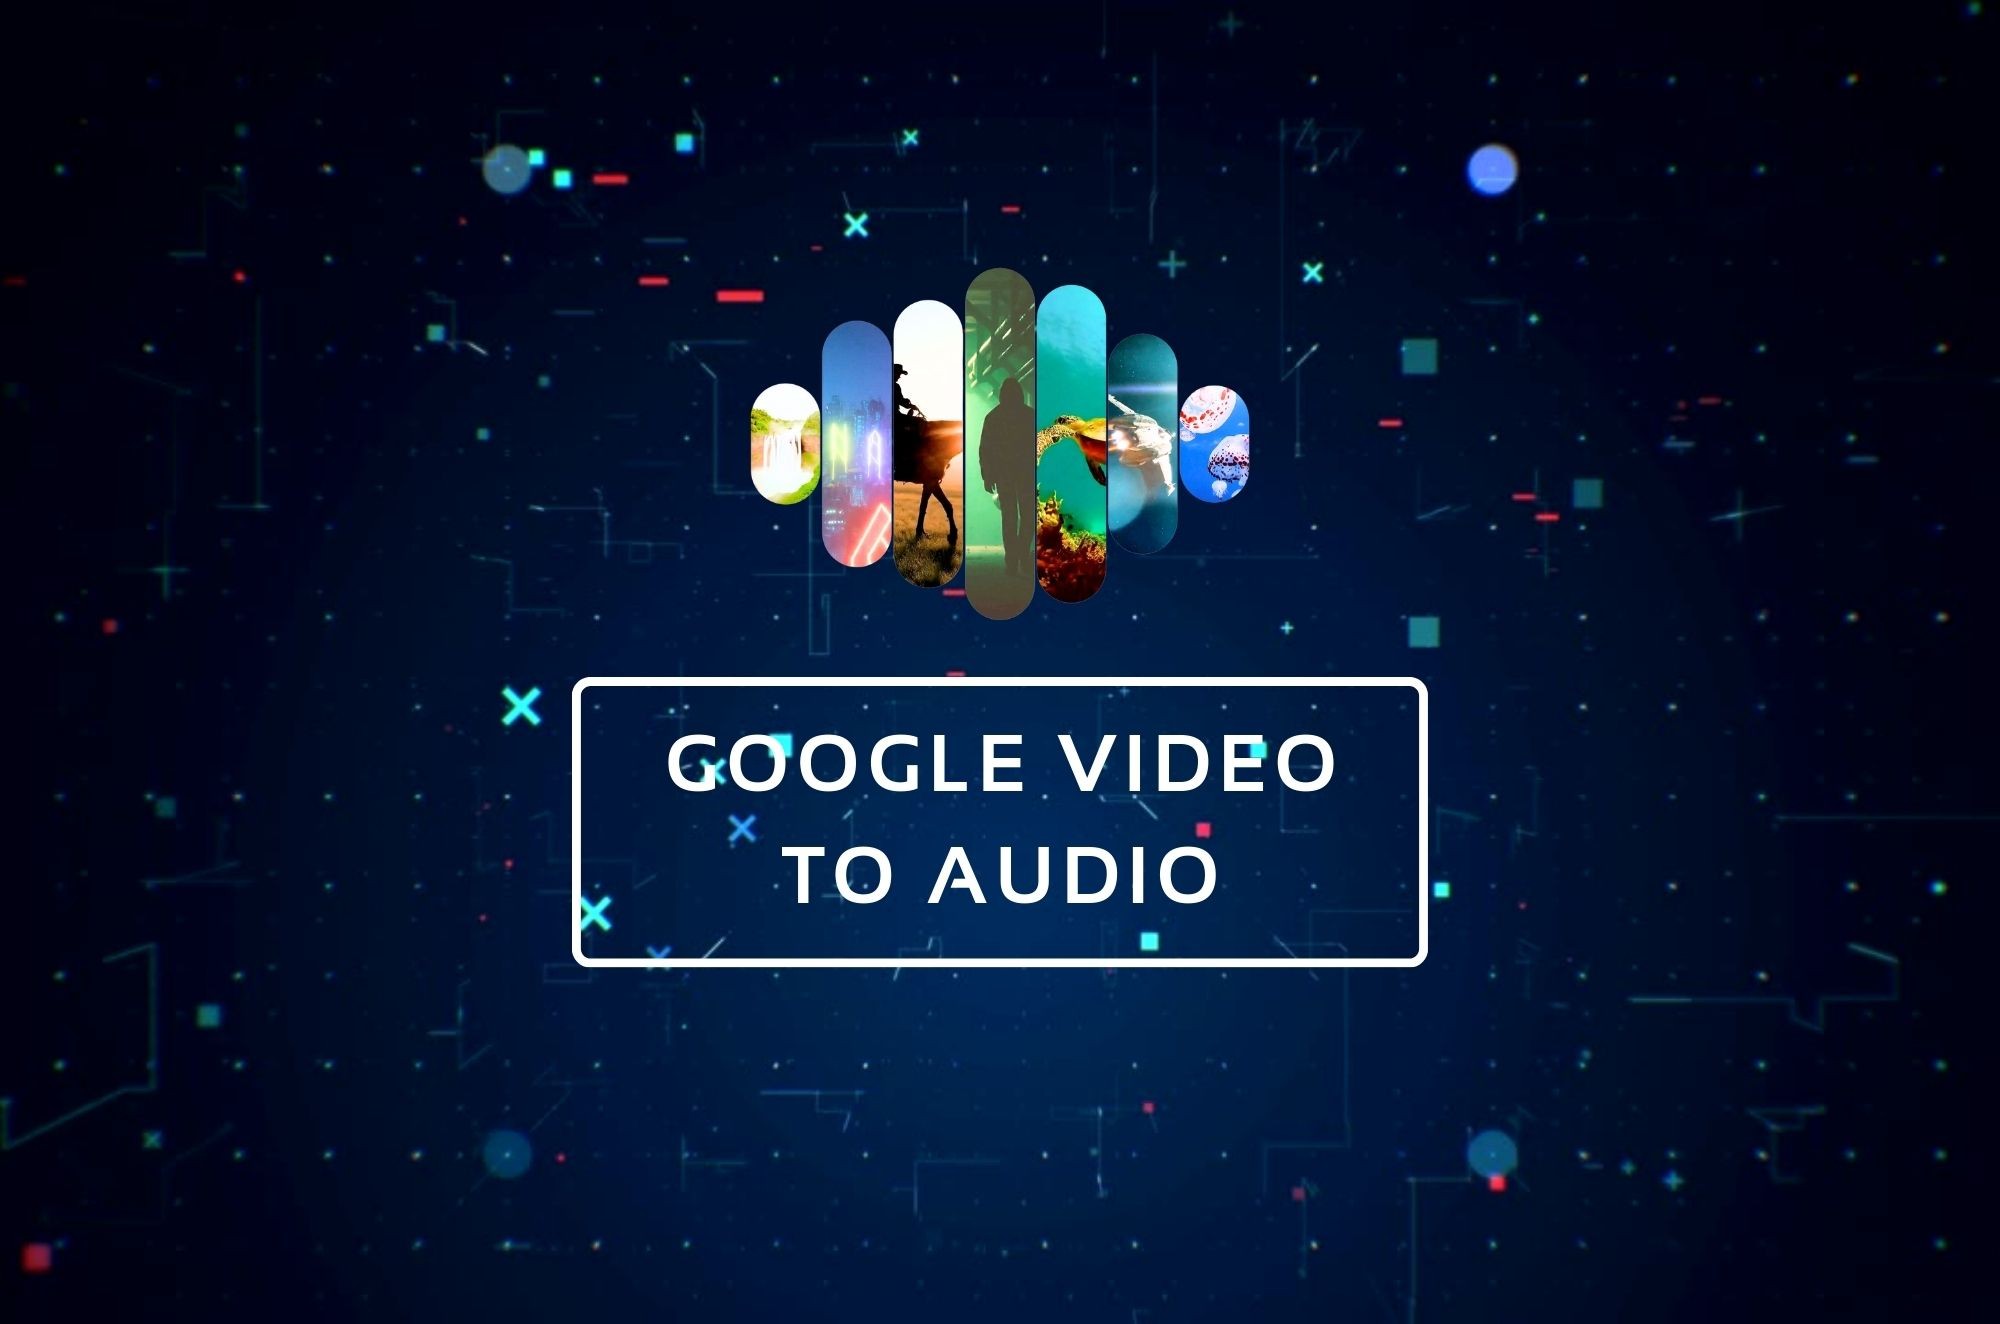 Google V2A - Exploring Google Video to Audio's Features and Future Impact